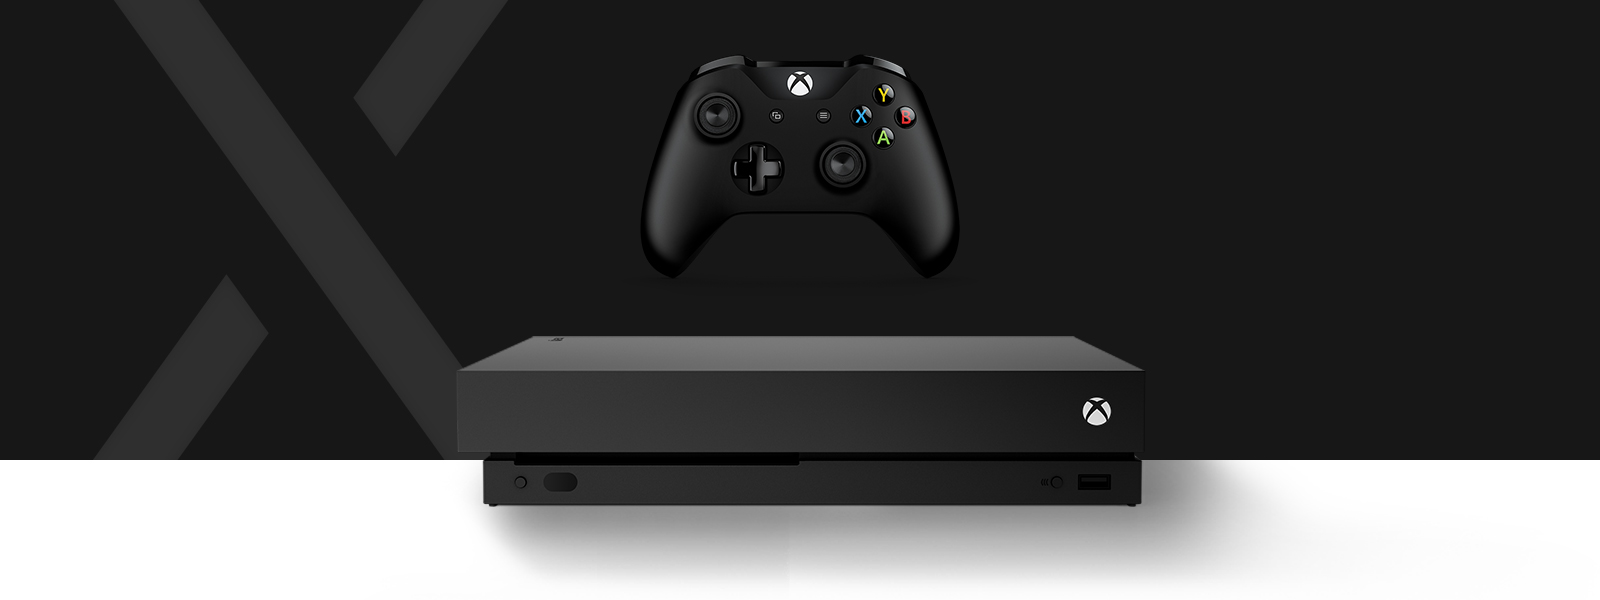 Front view of the Xbox One S All-digital edition console in front of a large stylized letter S